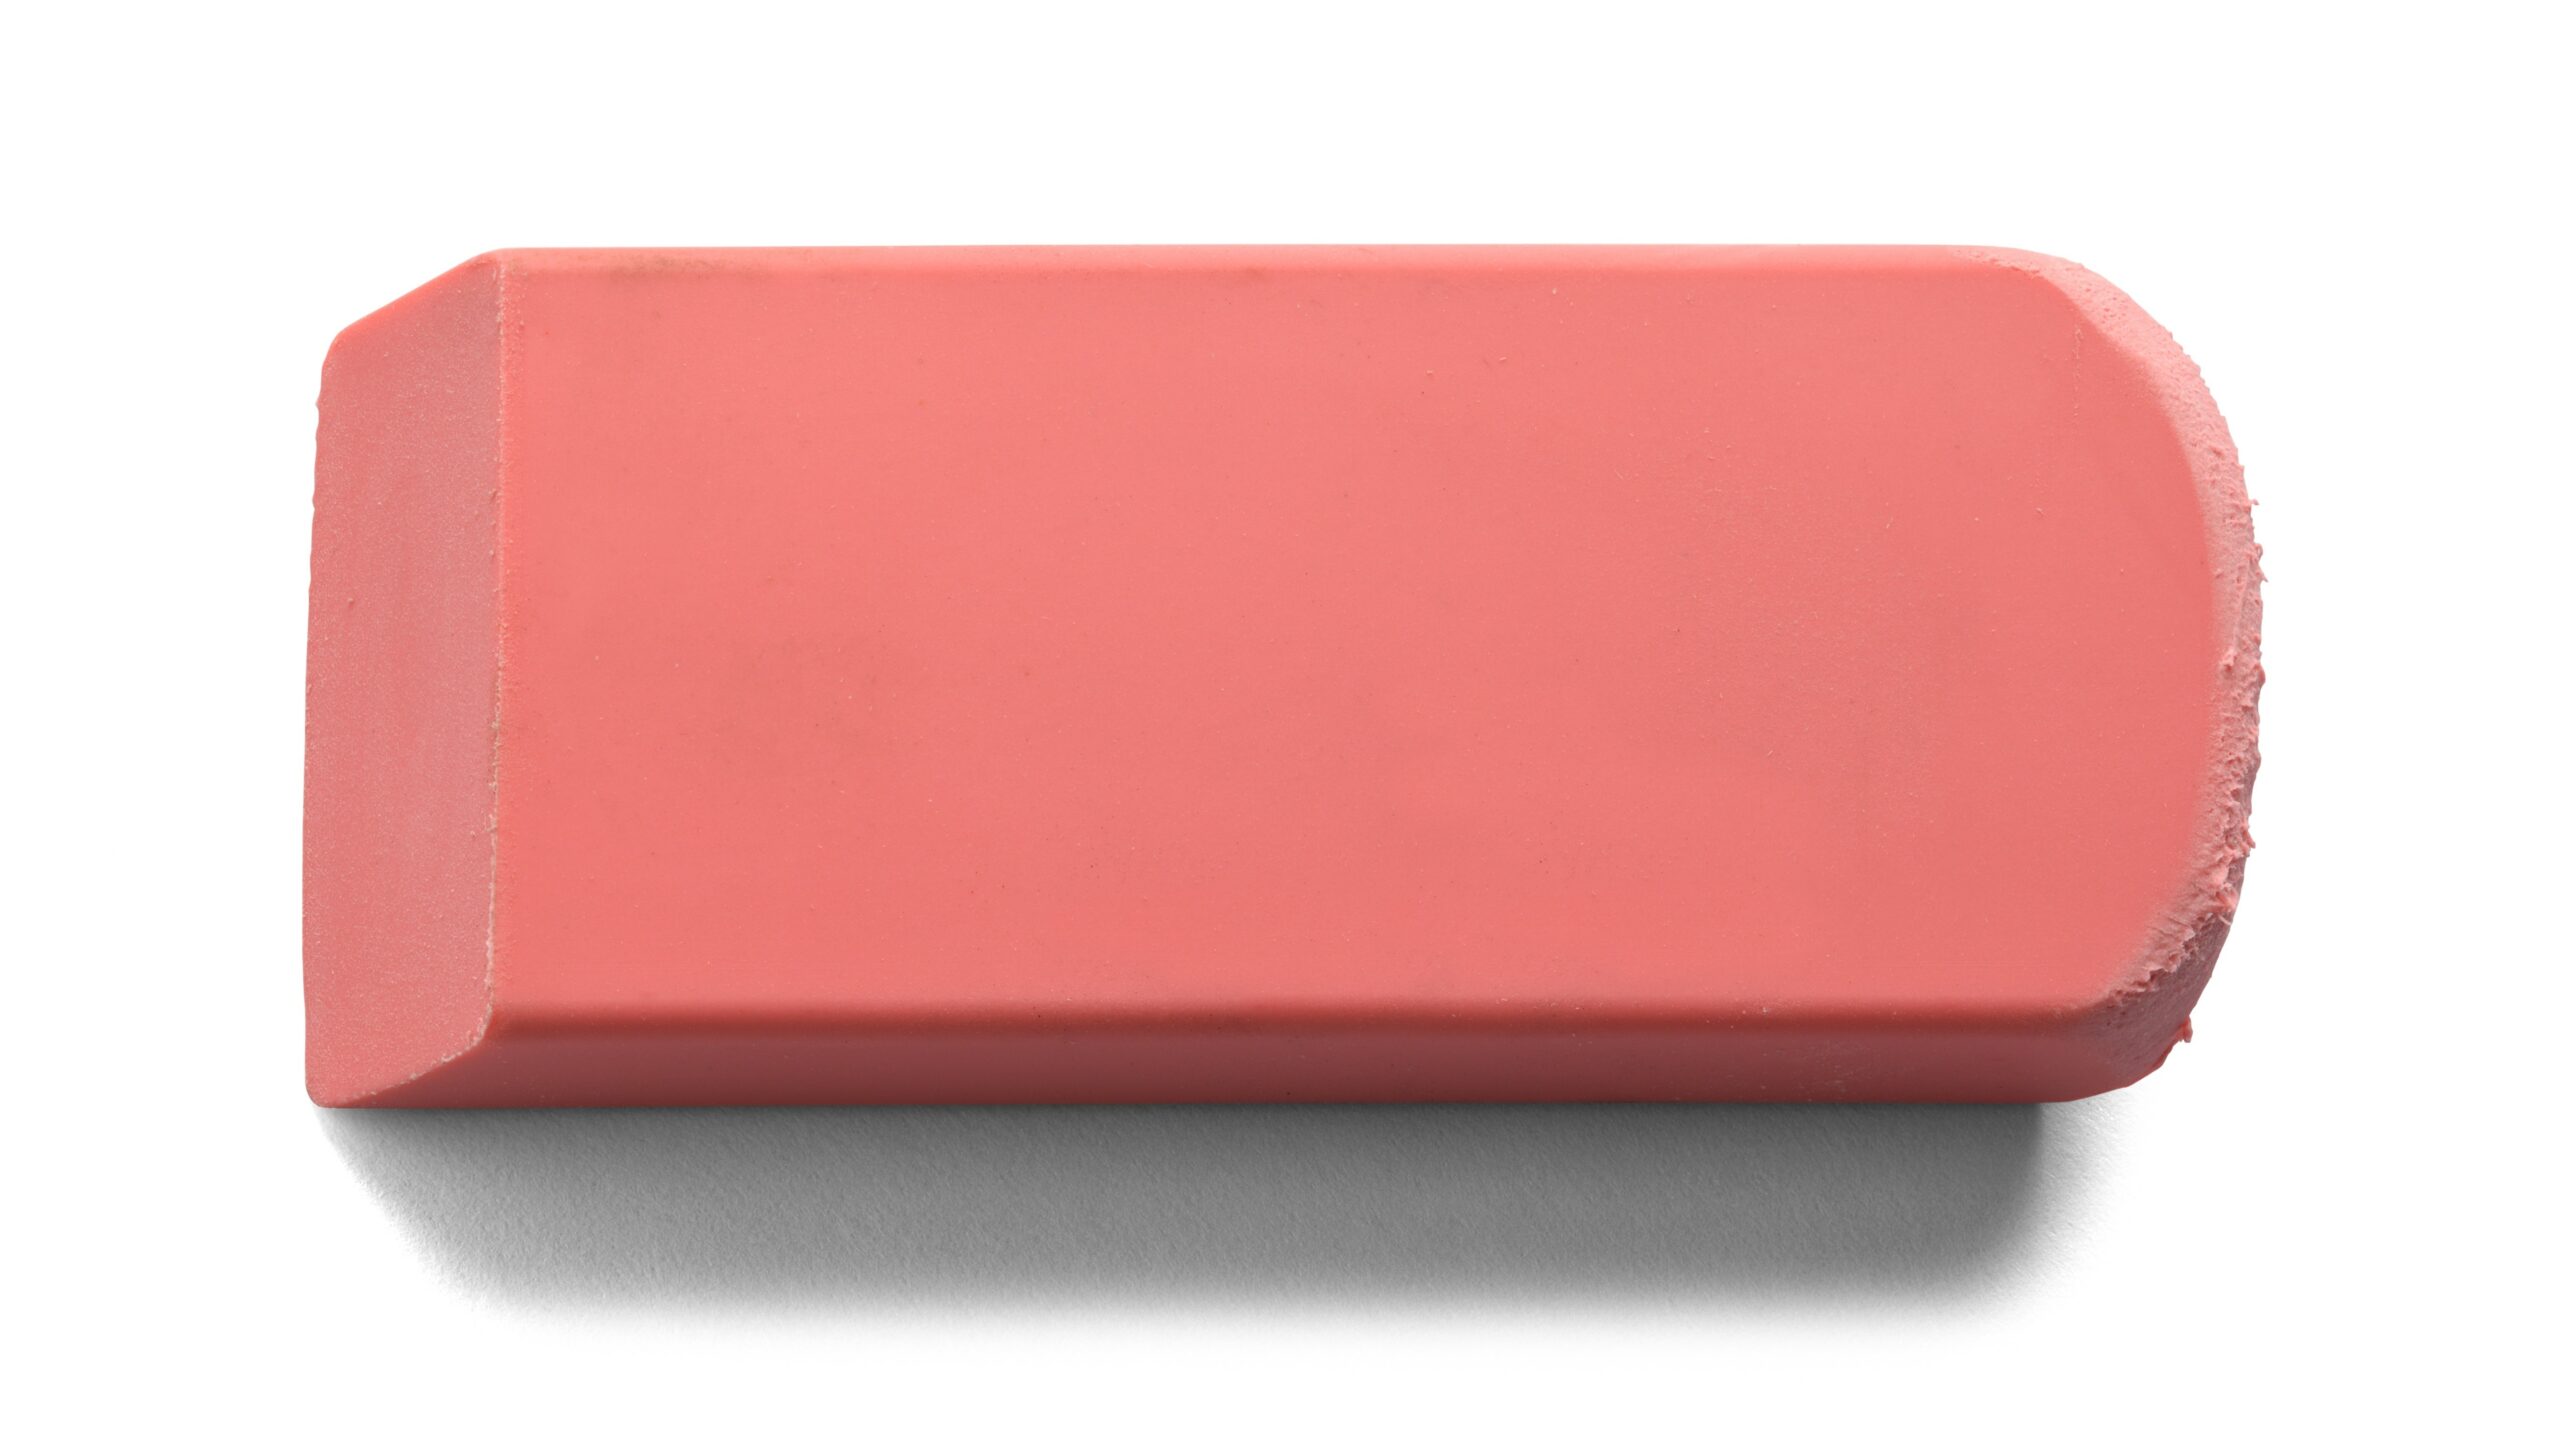 Worn,Old,Pink,Eraser,Top,View,Cut,Out,On,White.